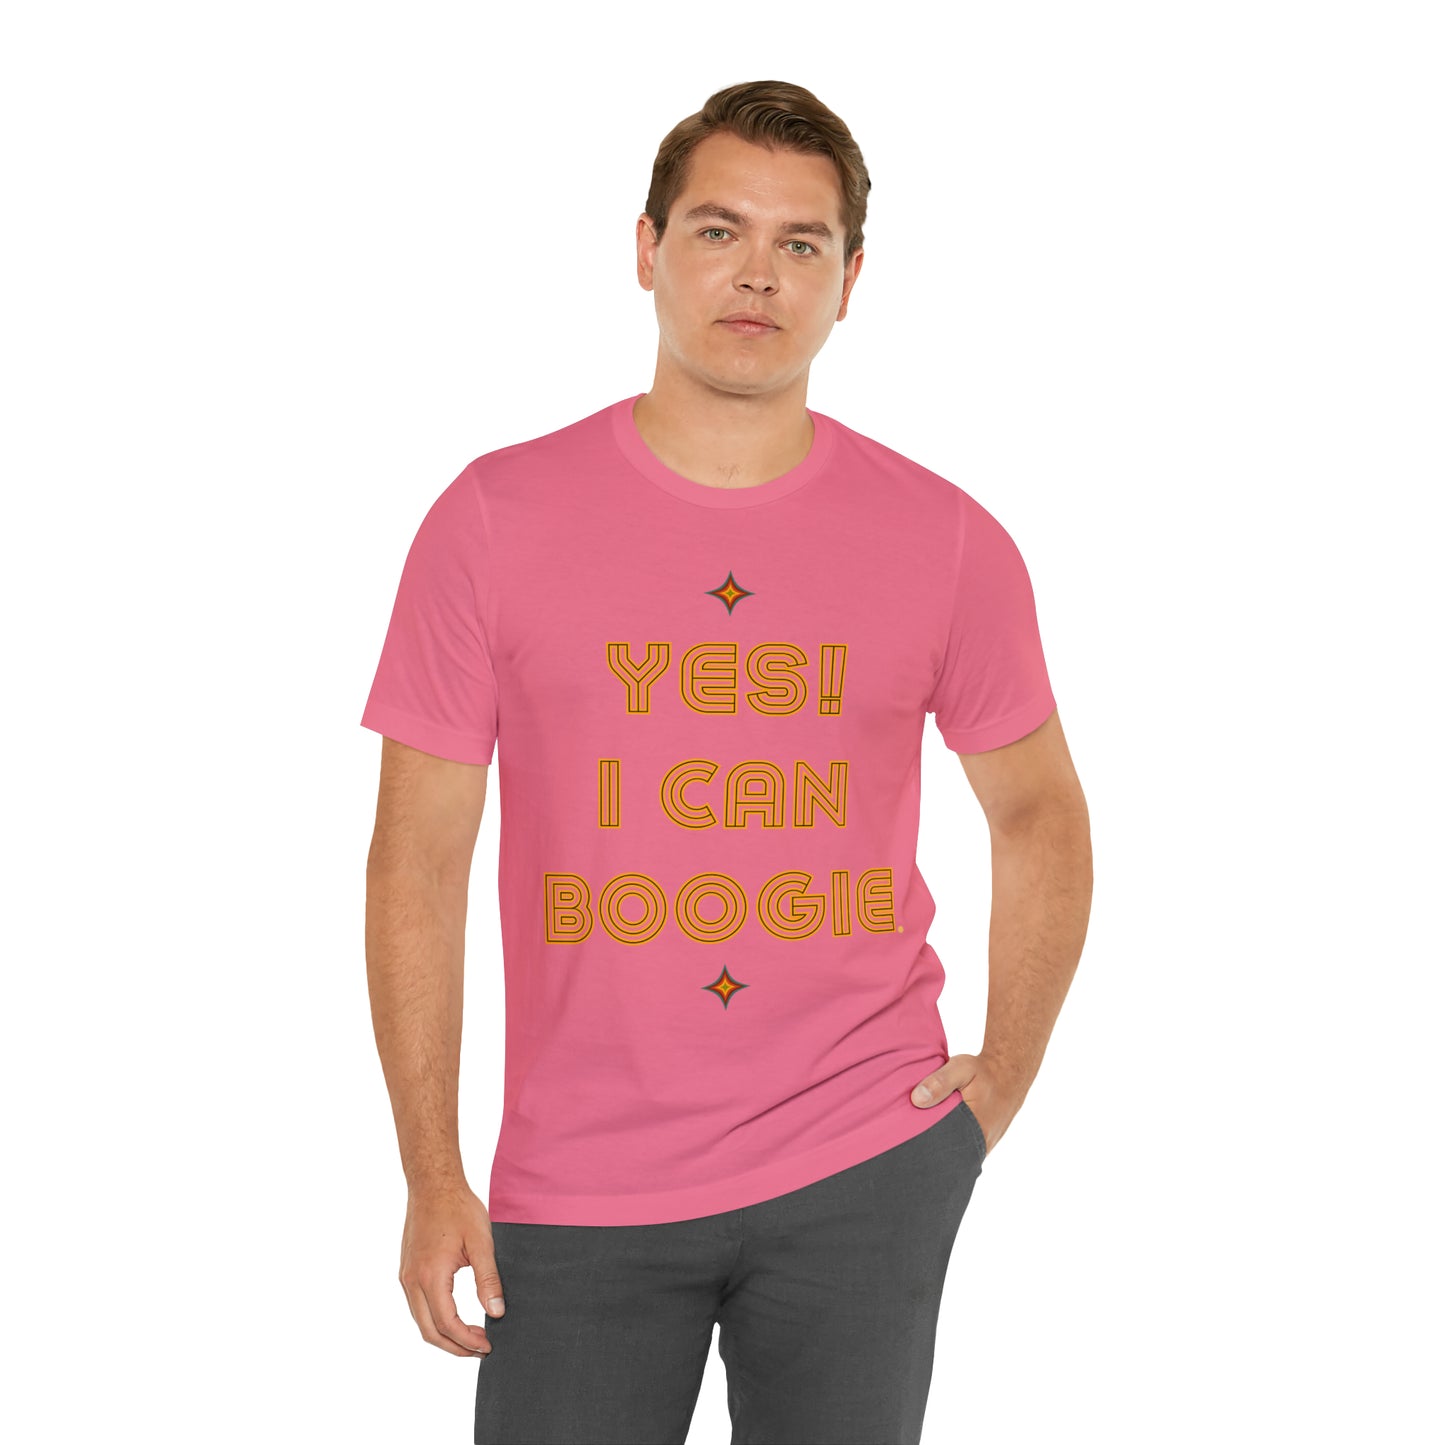 Dance, I Can Boogie, Retro Disco Dance, Words- Adult, Regular Fit, Soft Cotton, Full Size Image, T-shirt